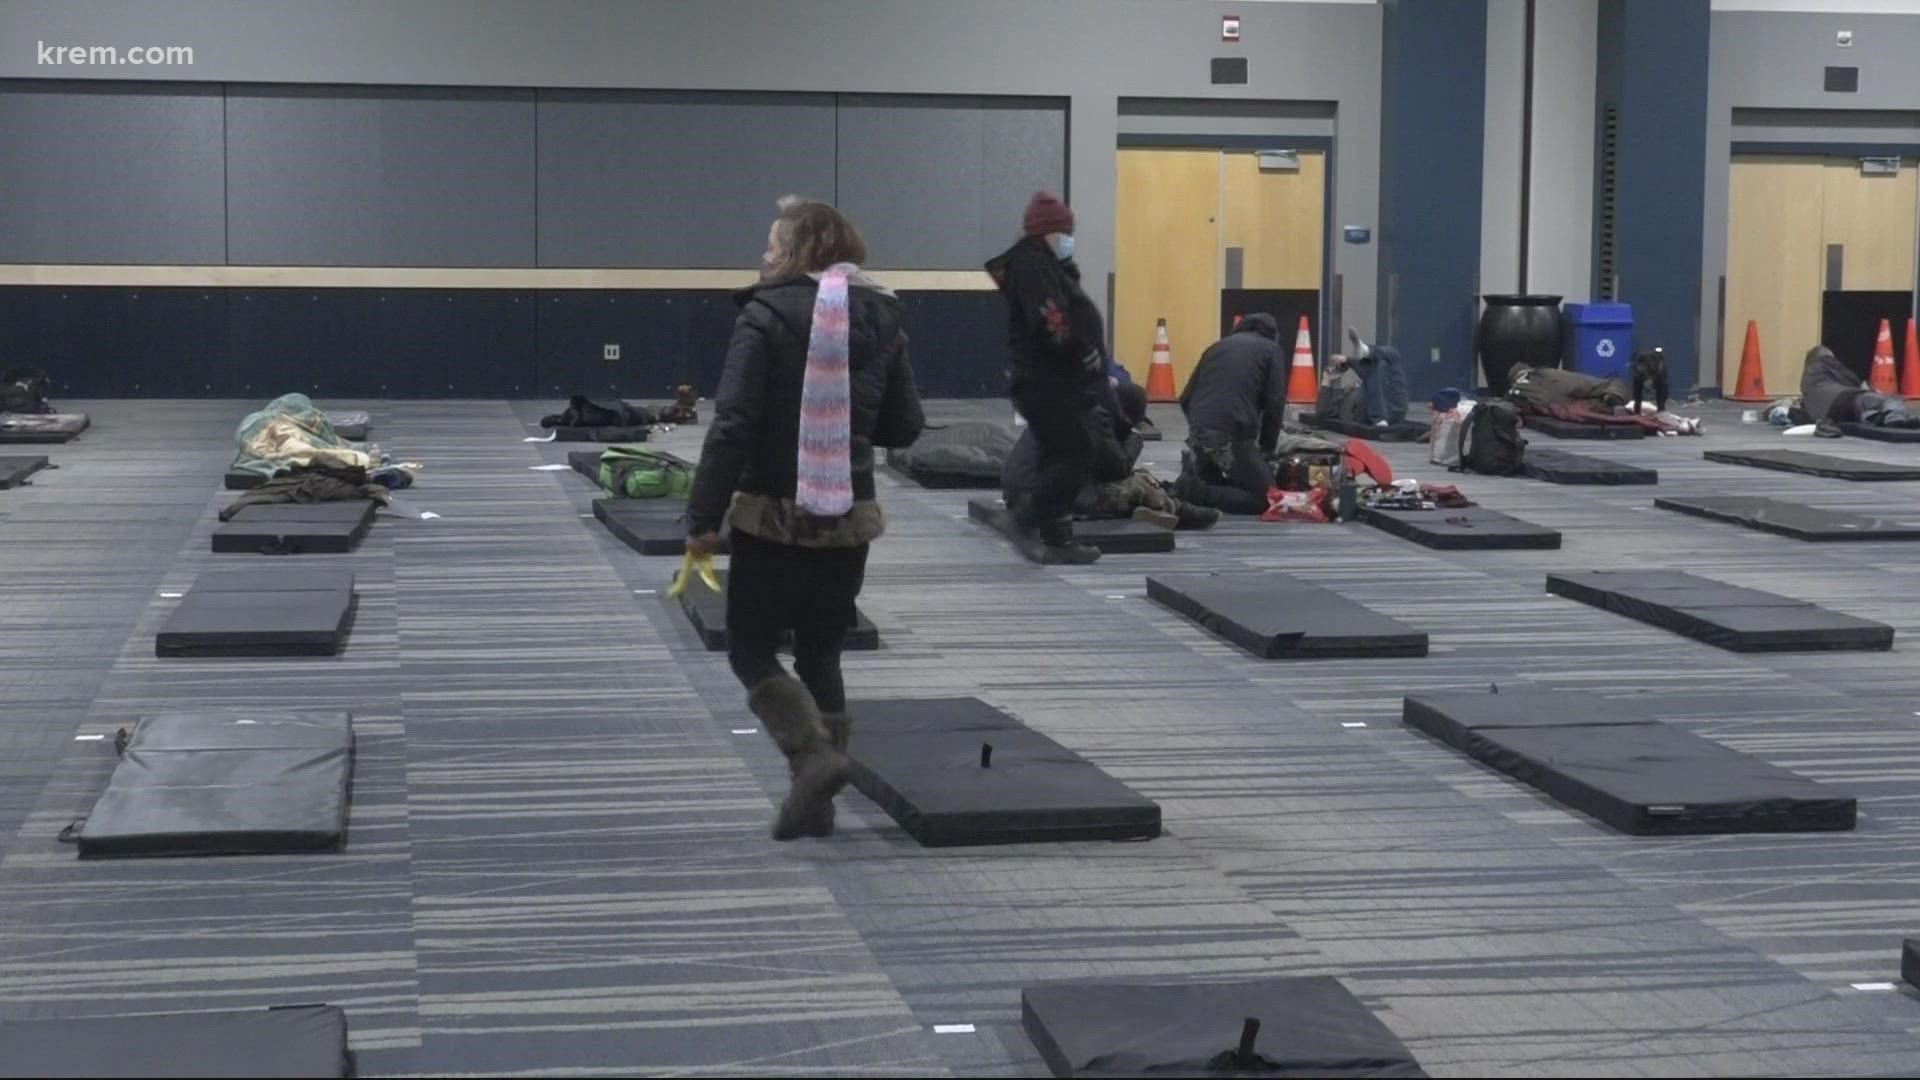 The city of Spokane and community partners came together to put at warming center in the Spokane Convention Center to house people through Jan. 2.